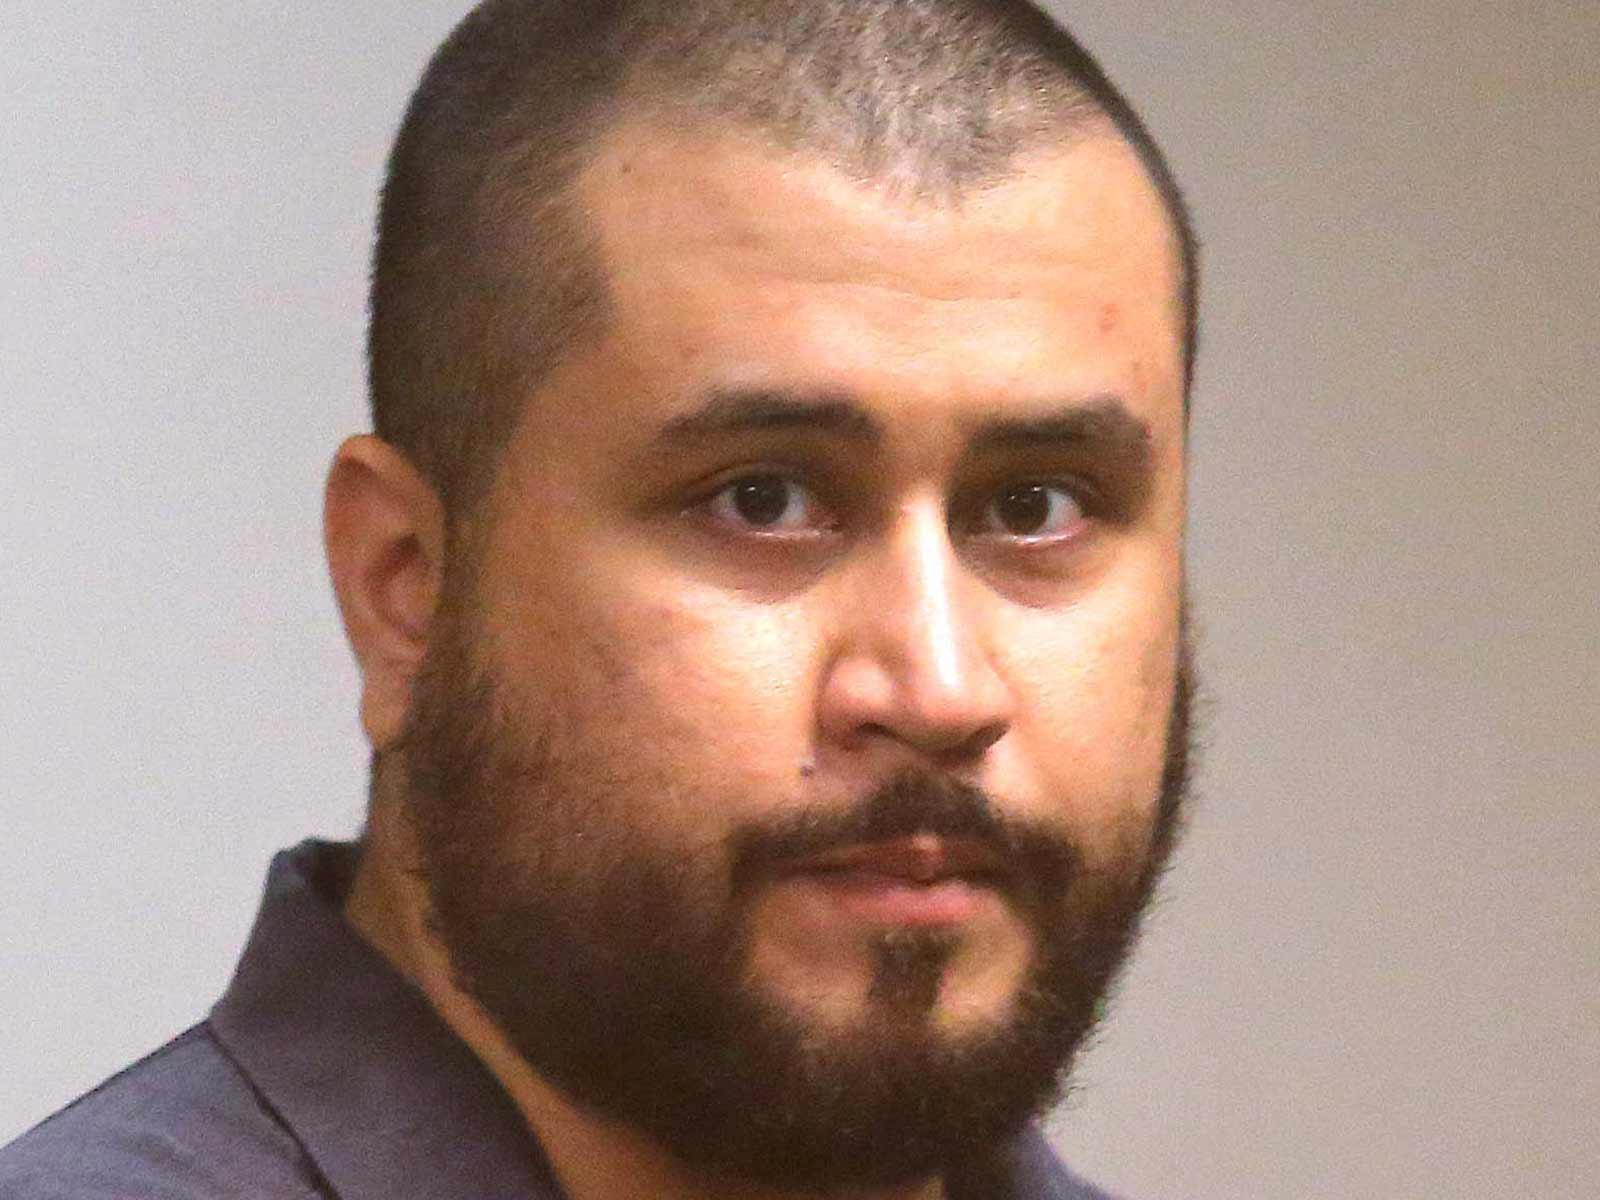 George Zimmerman Charged After Threatening Private Investigator for Trayvon Martin Documentary